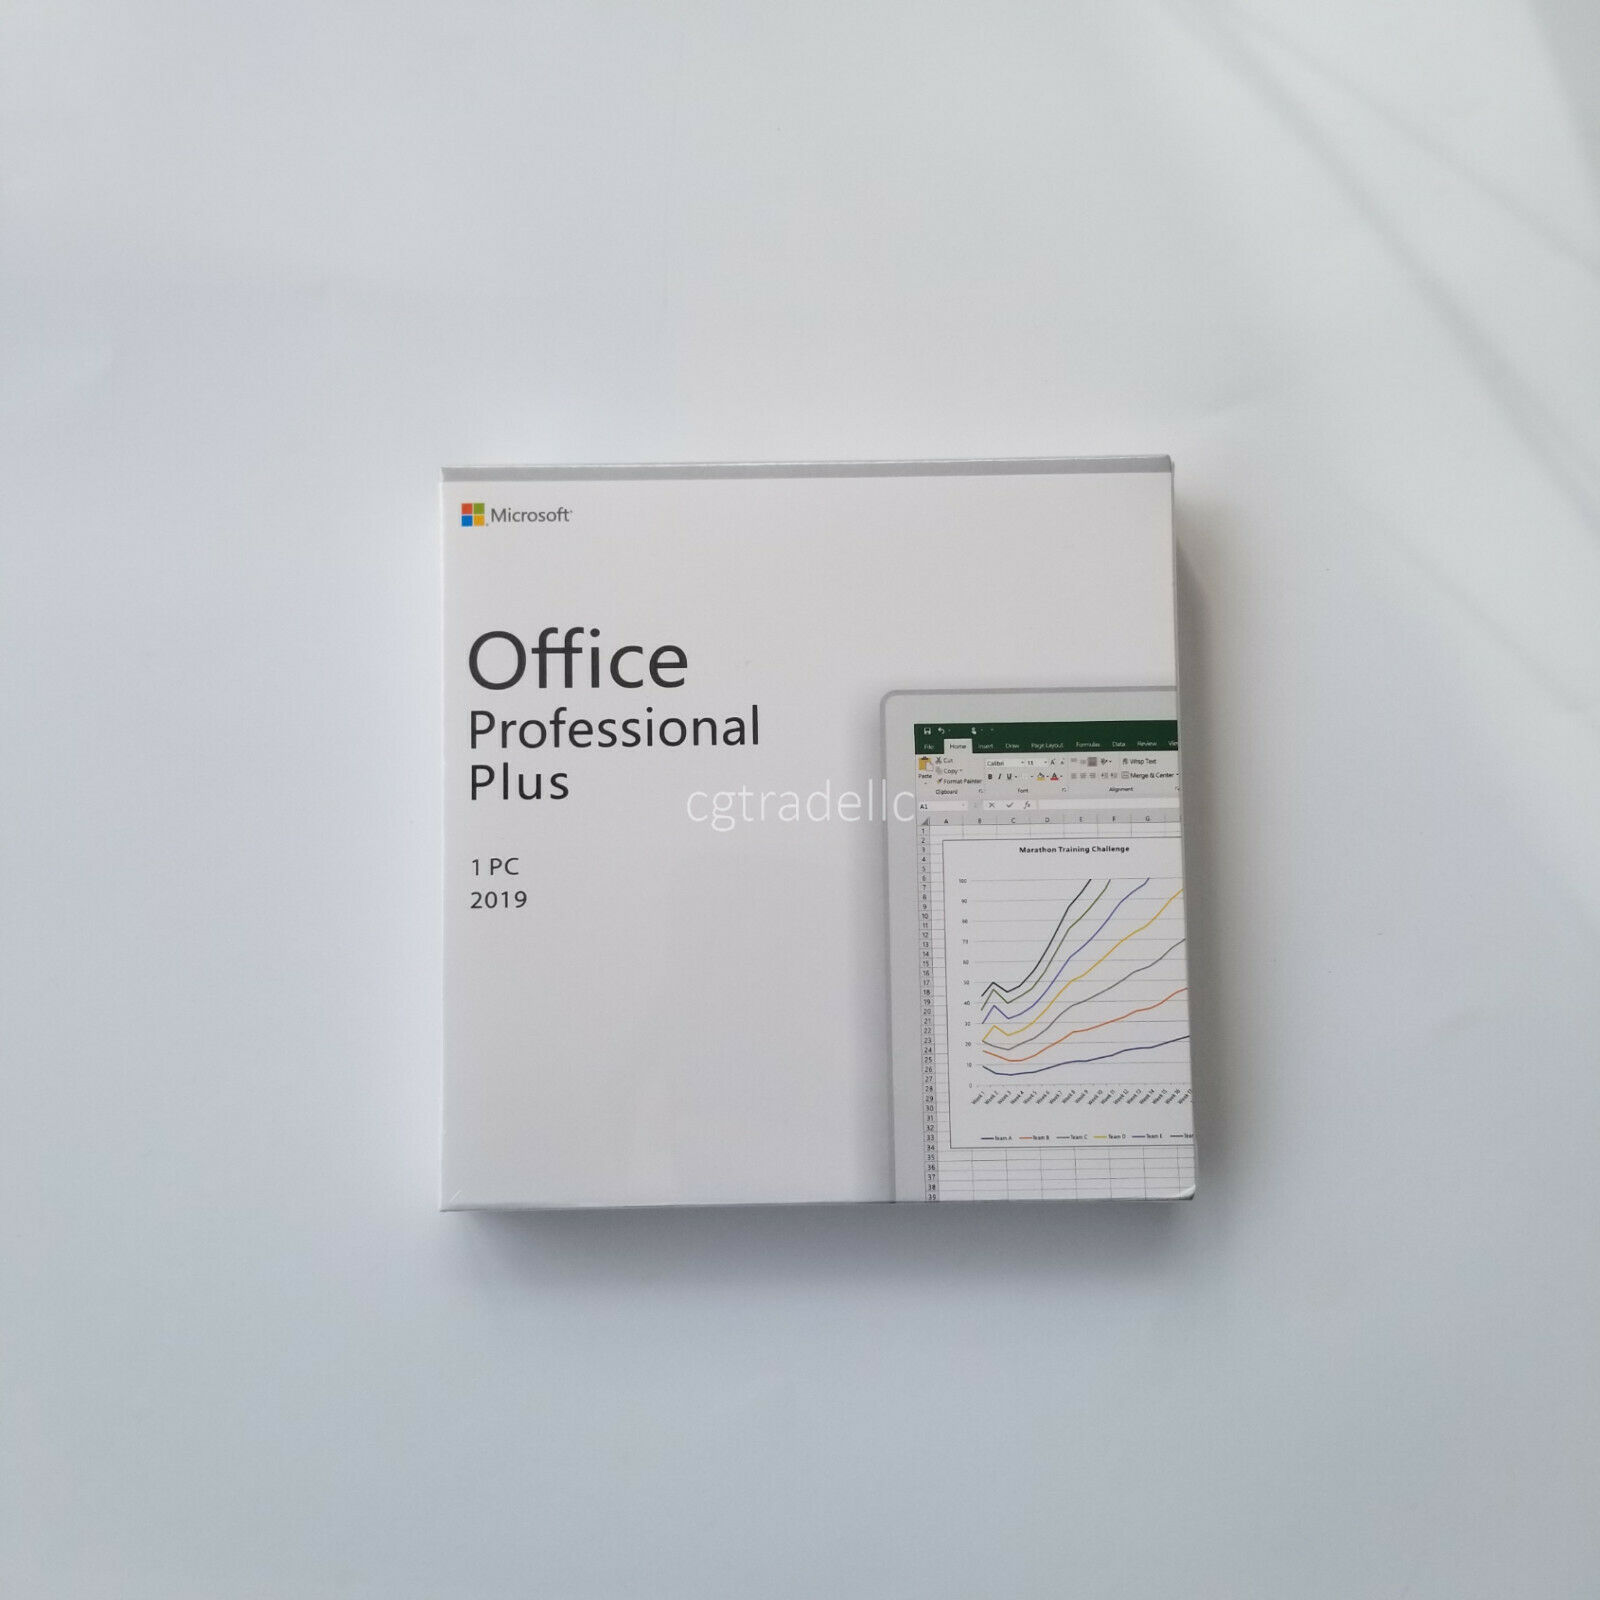 Microsoft Office 2019 Ms Professional Plus Retail Dvd For Windows 10 1pc